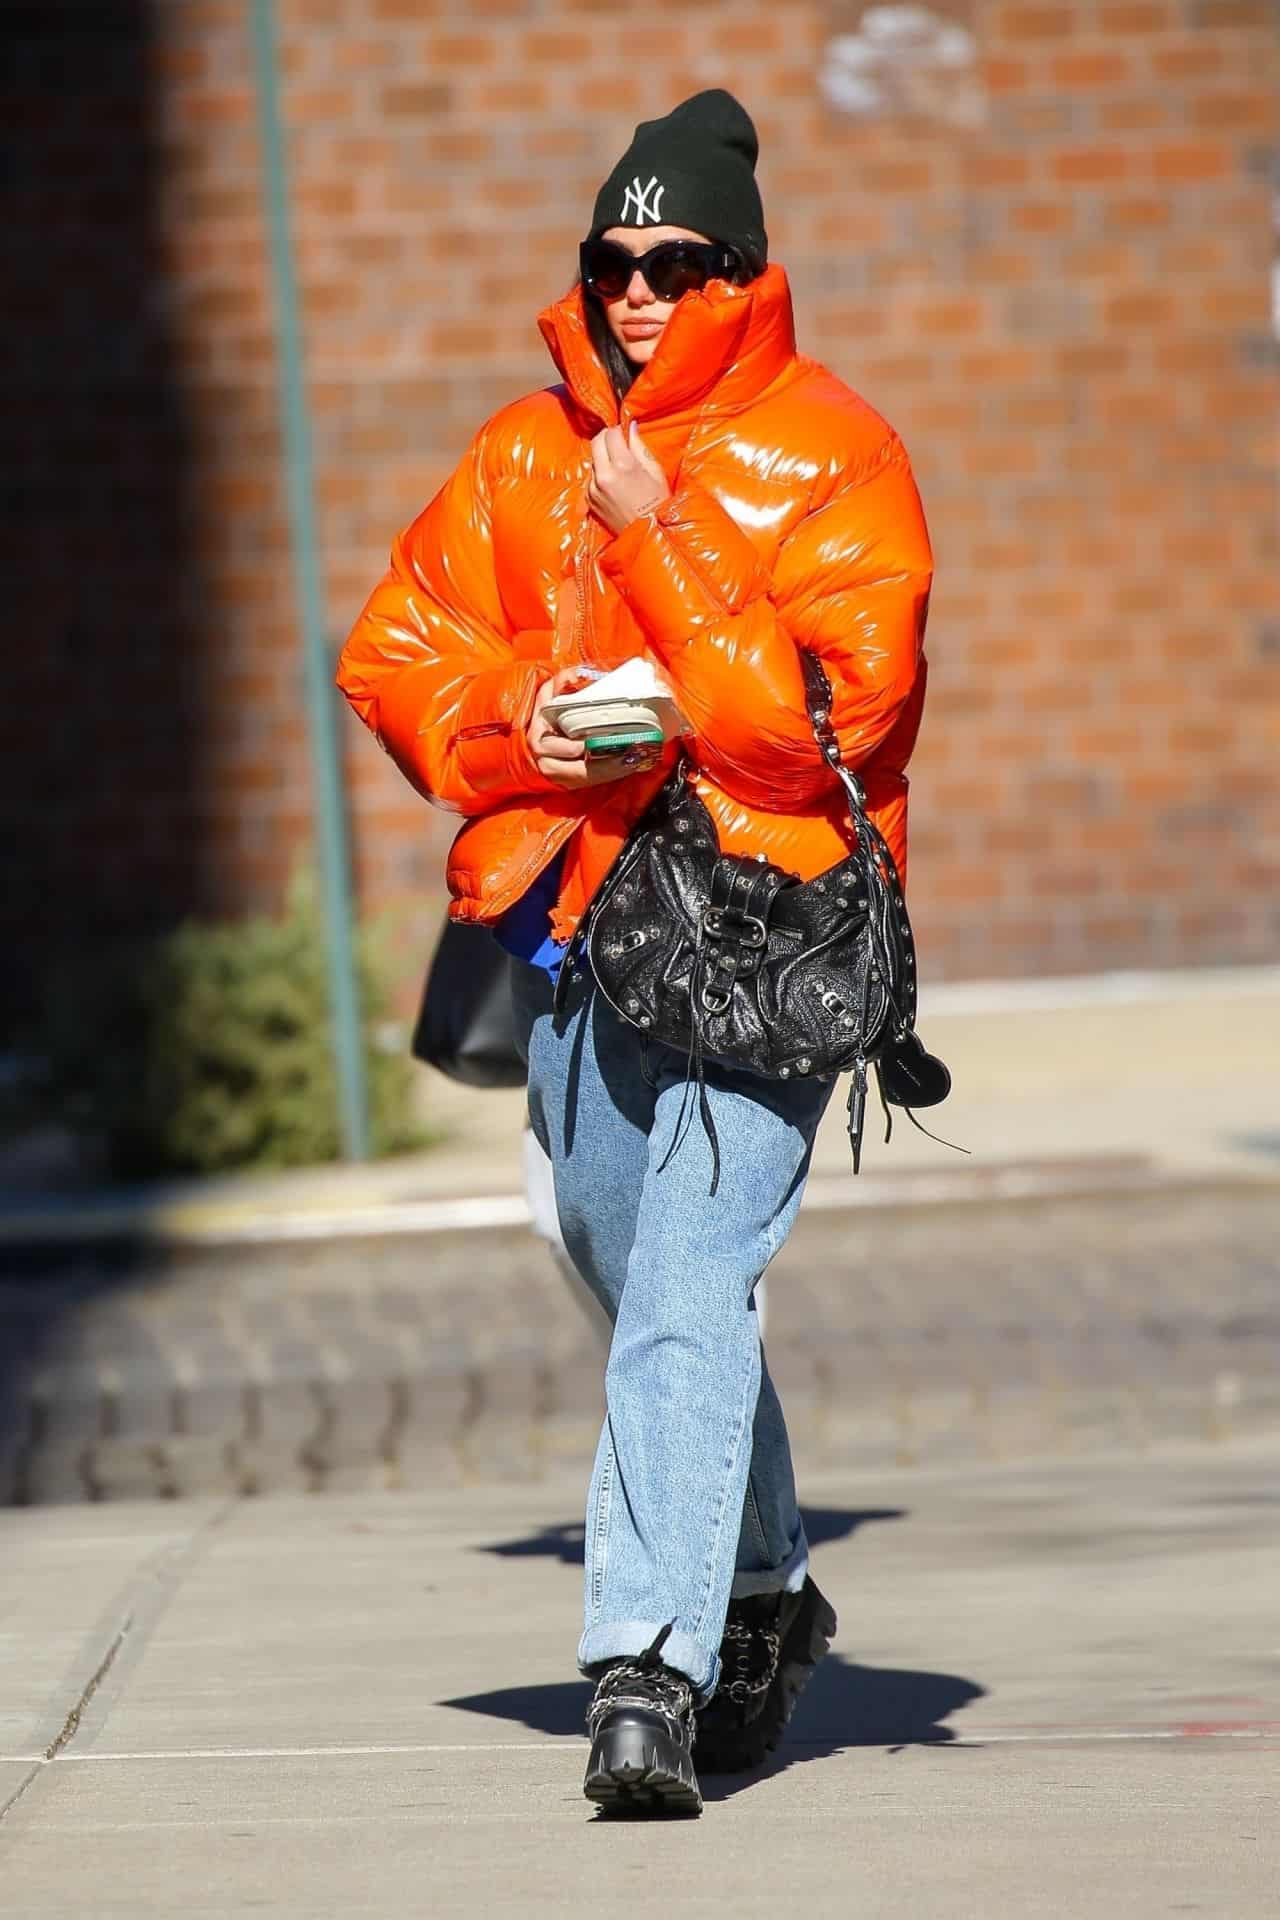 Dua Lipa Bundles Up in a Bright Orange Jacket as she Headed to the Gym